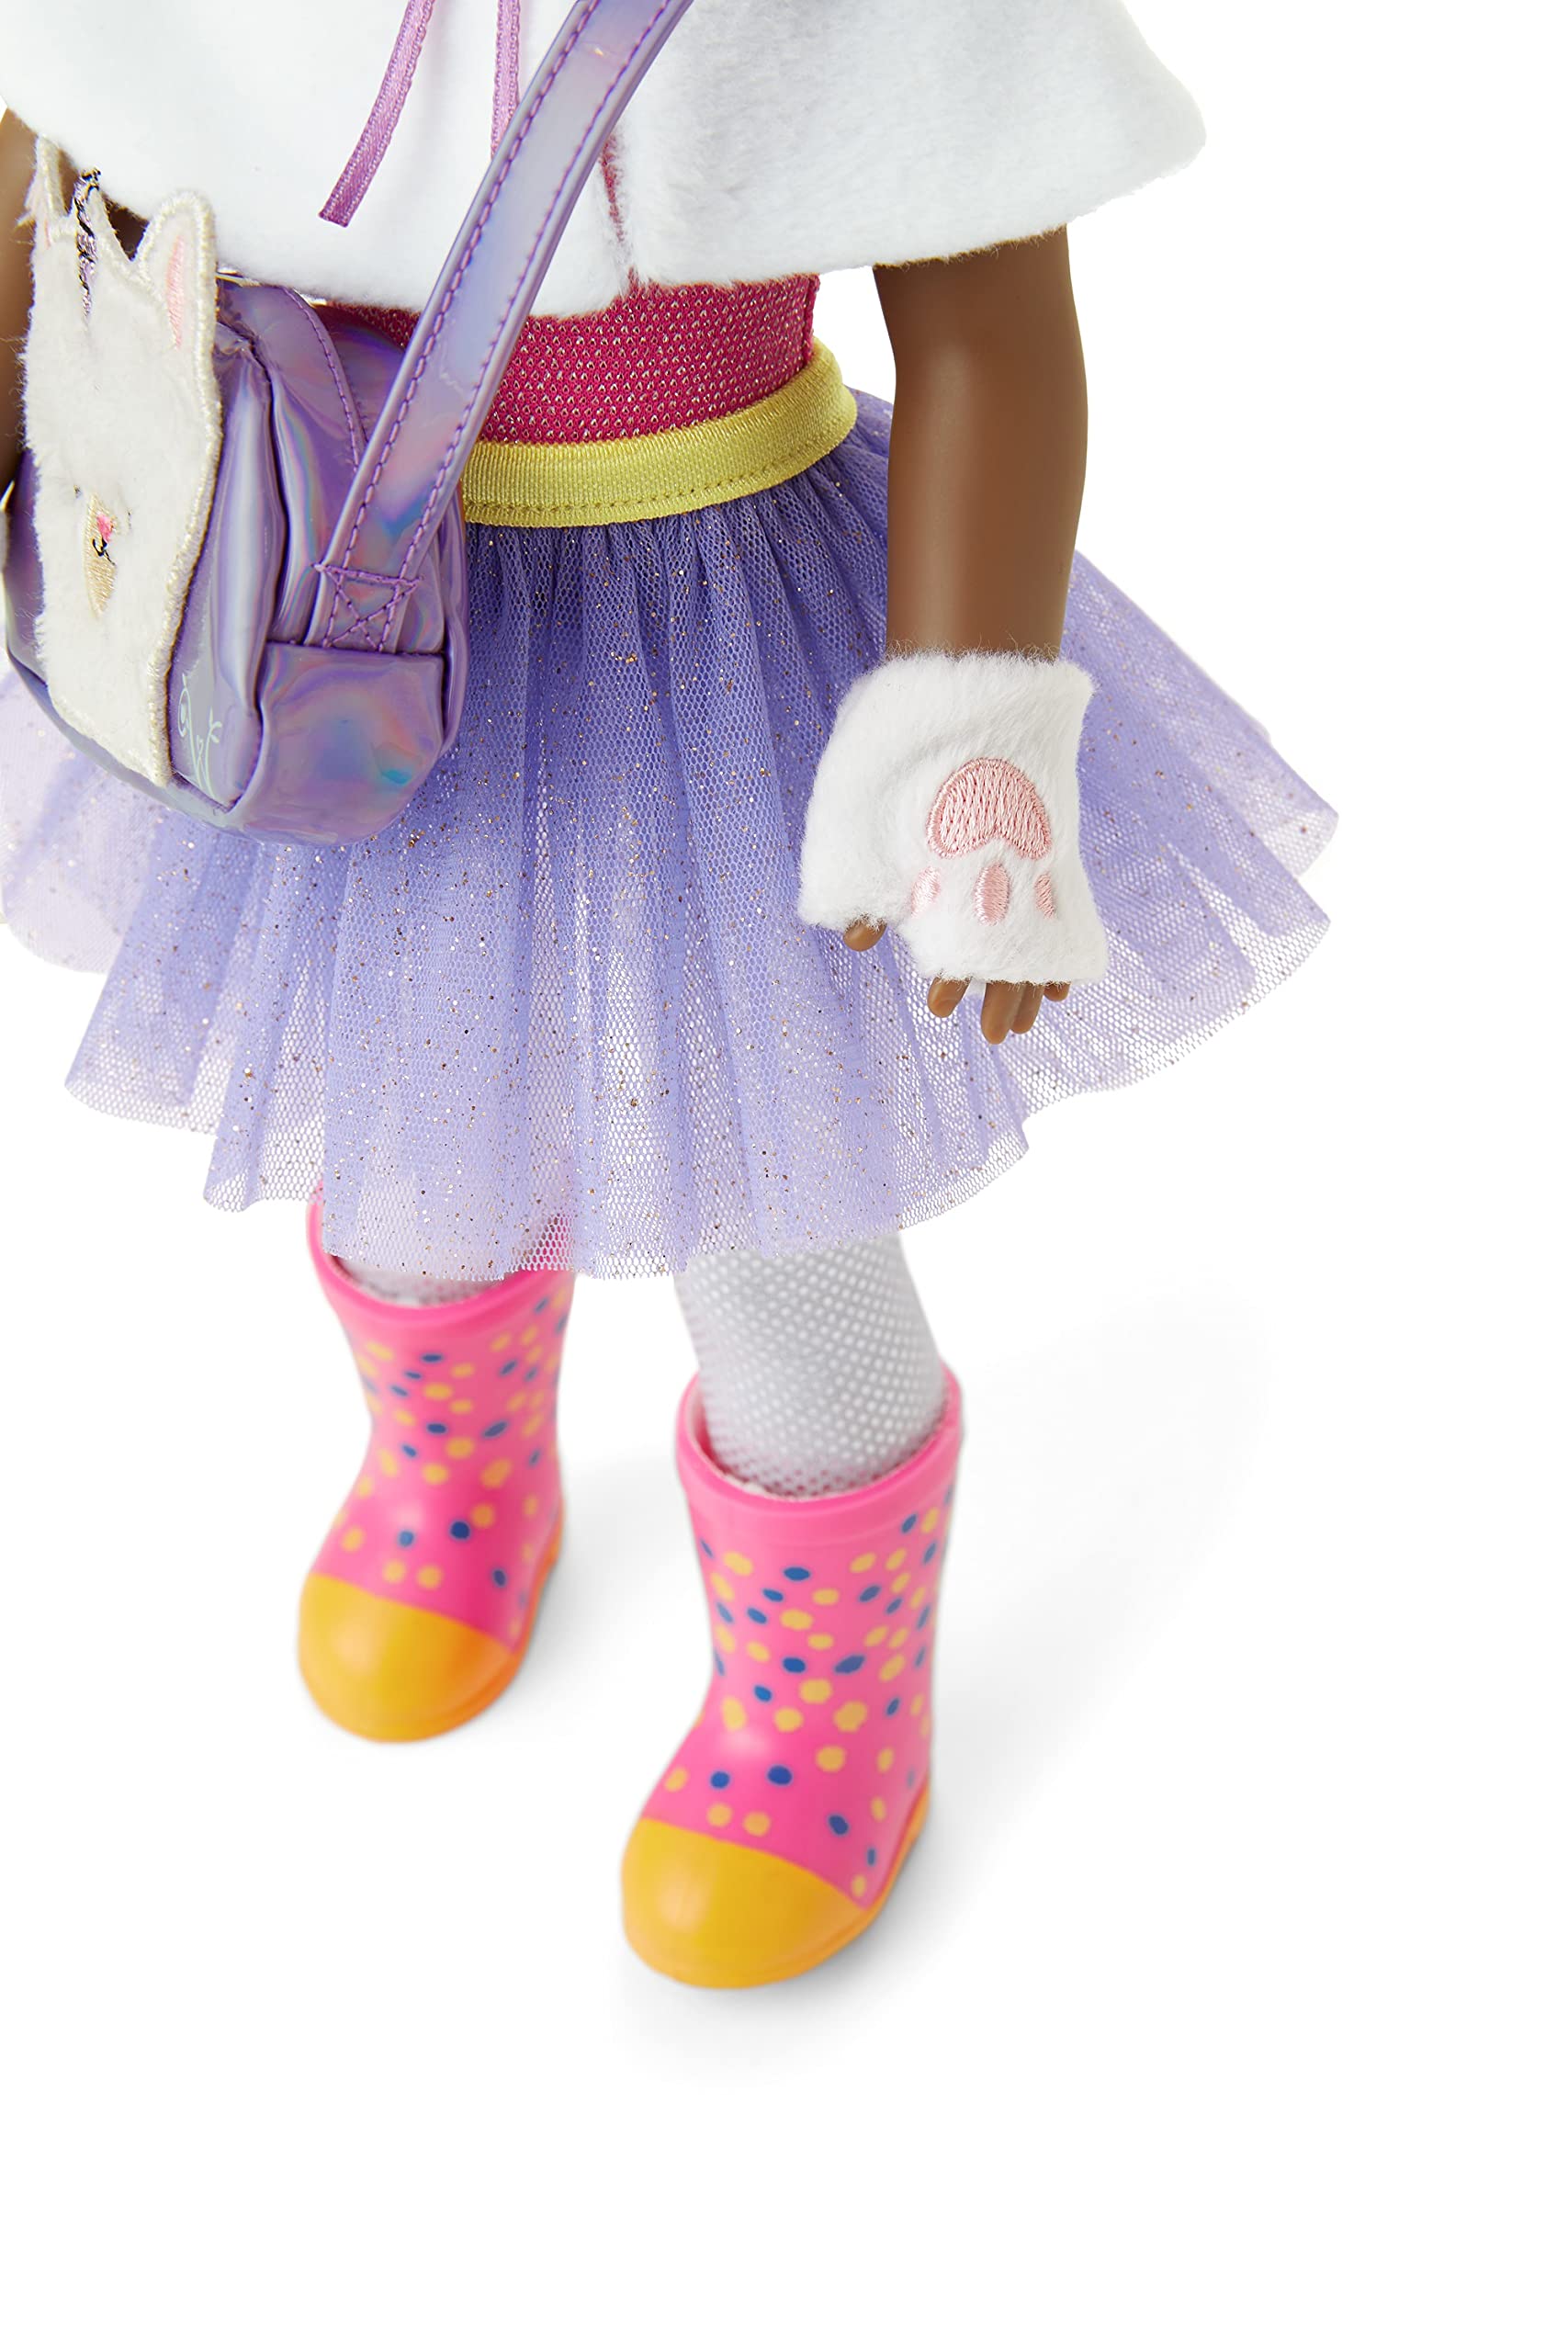 American Girl WellieWishers Magical Llamacorn Accessories for 14.5